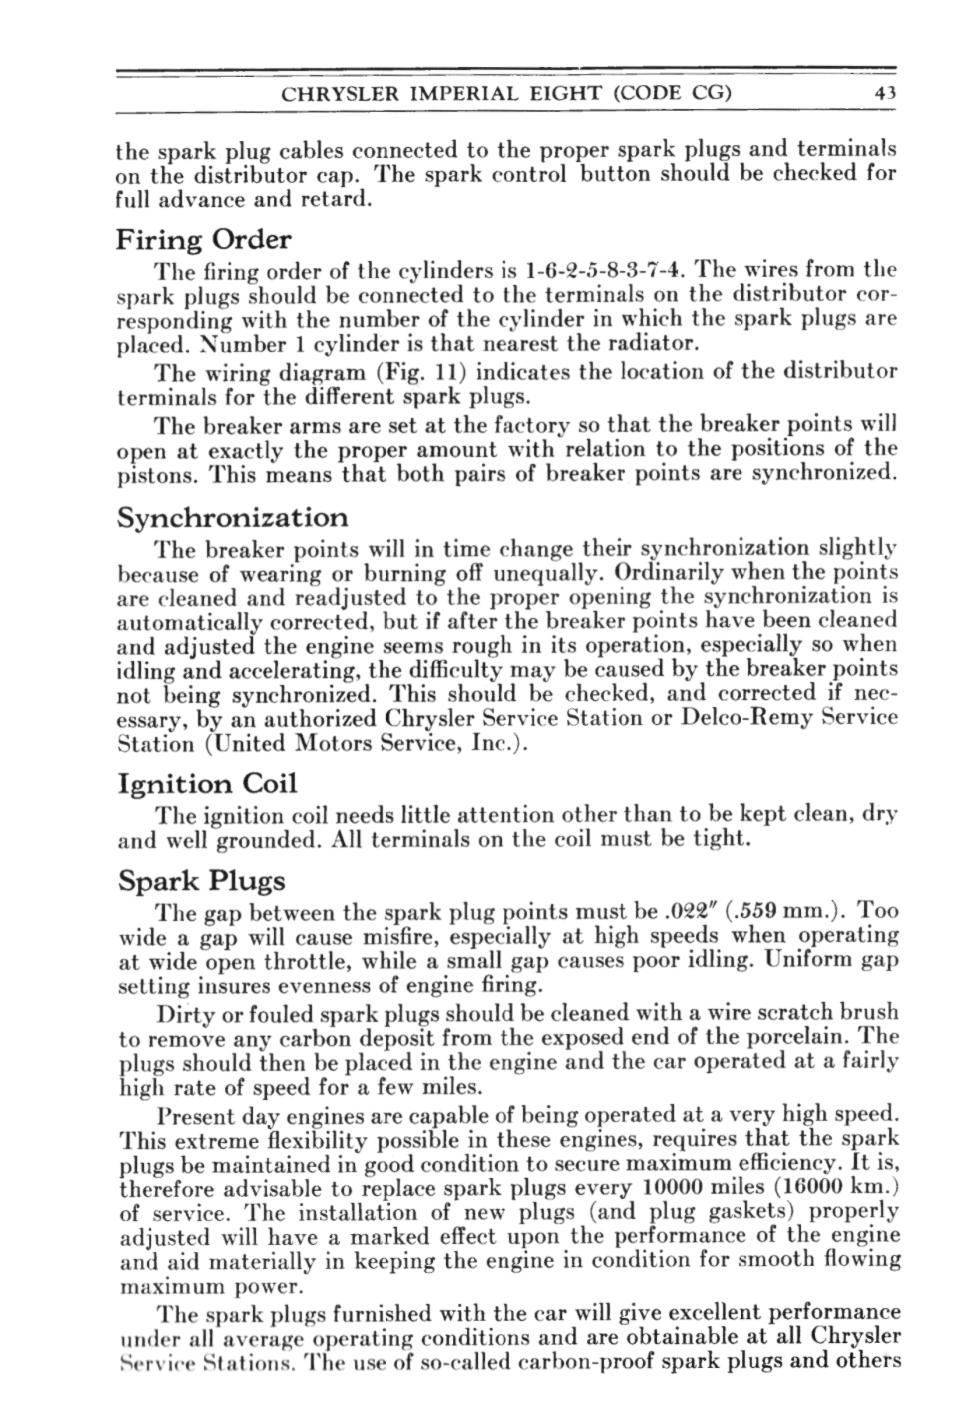 1931 Chrysler Imperial Owners Manual Page 60